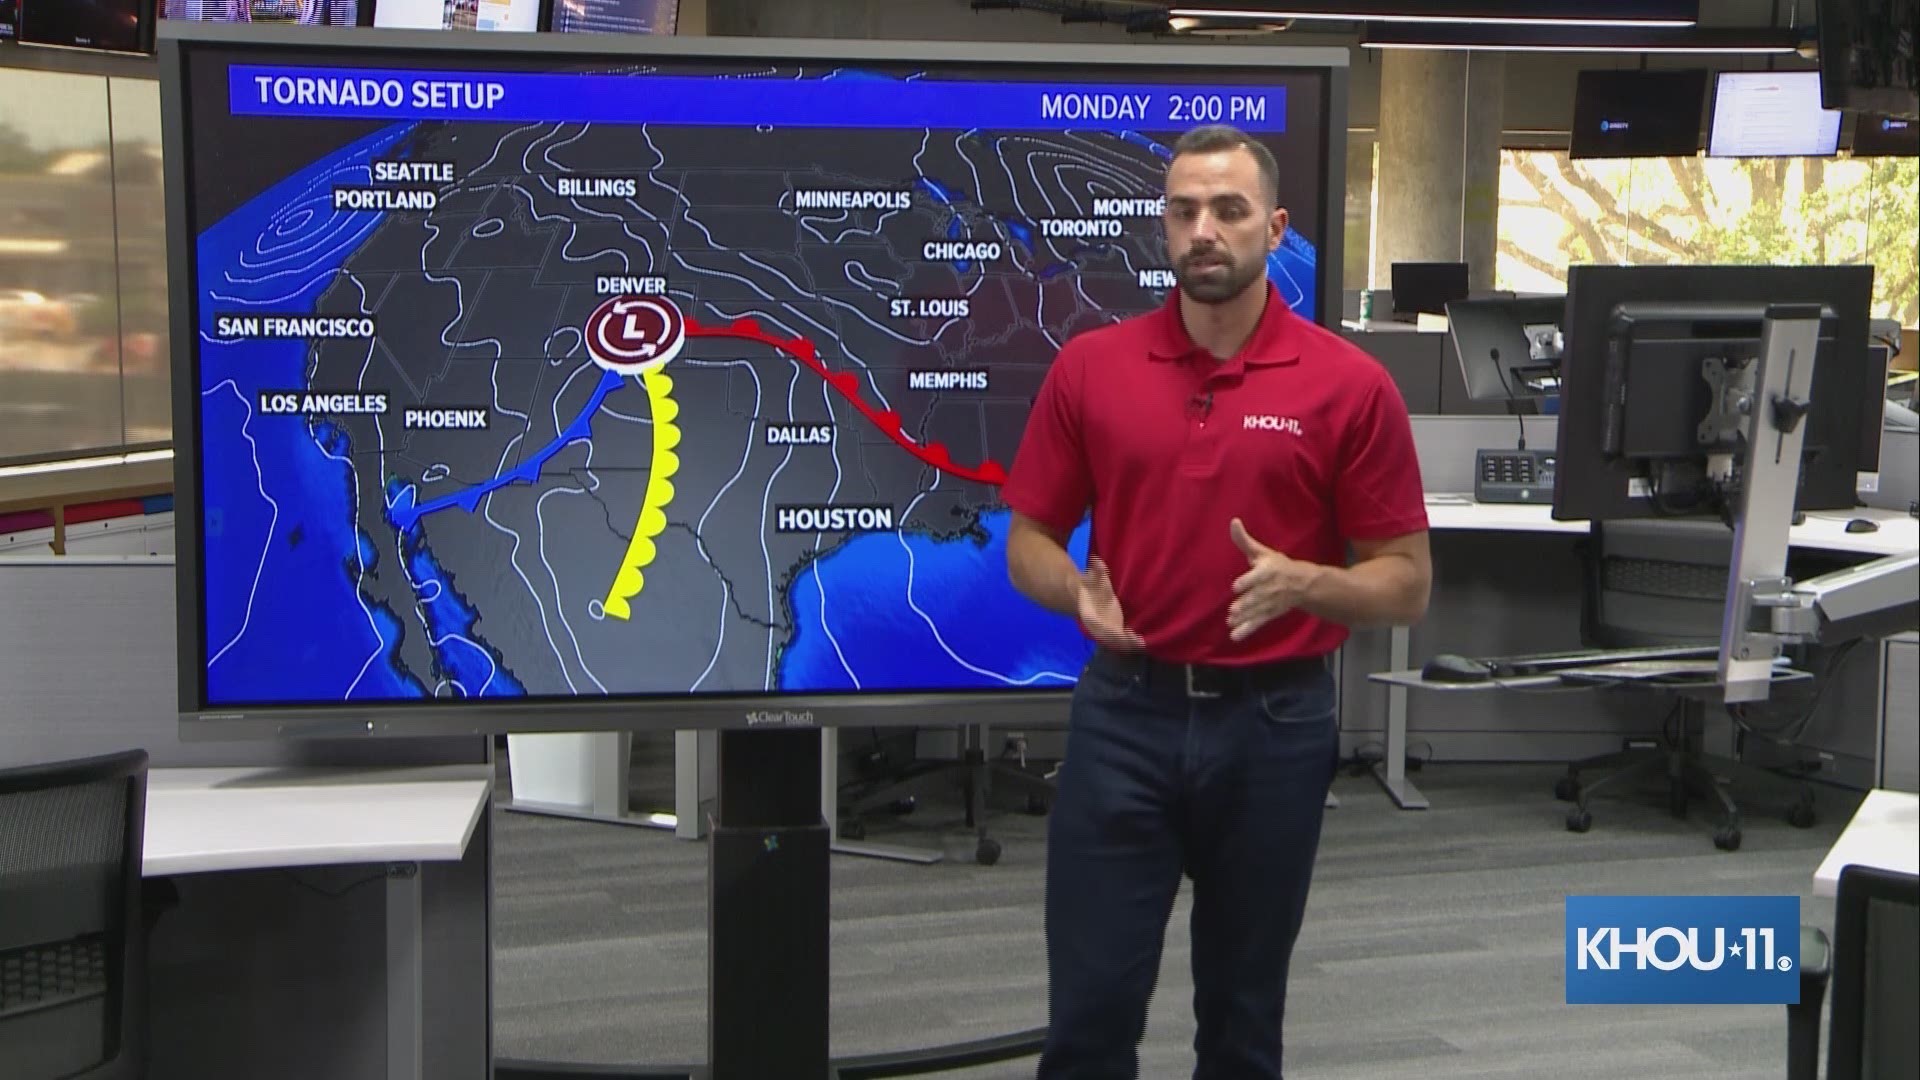 KHOU 11 Meteorologist Blake Mathews has the latest on the severe weather in north Texas and Oklahoma.